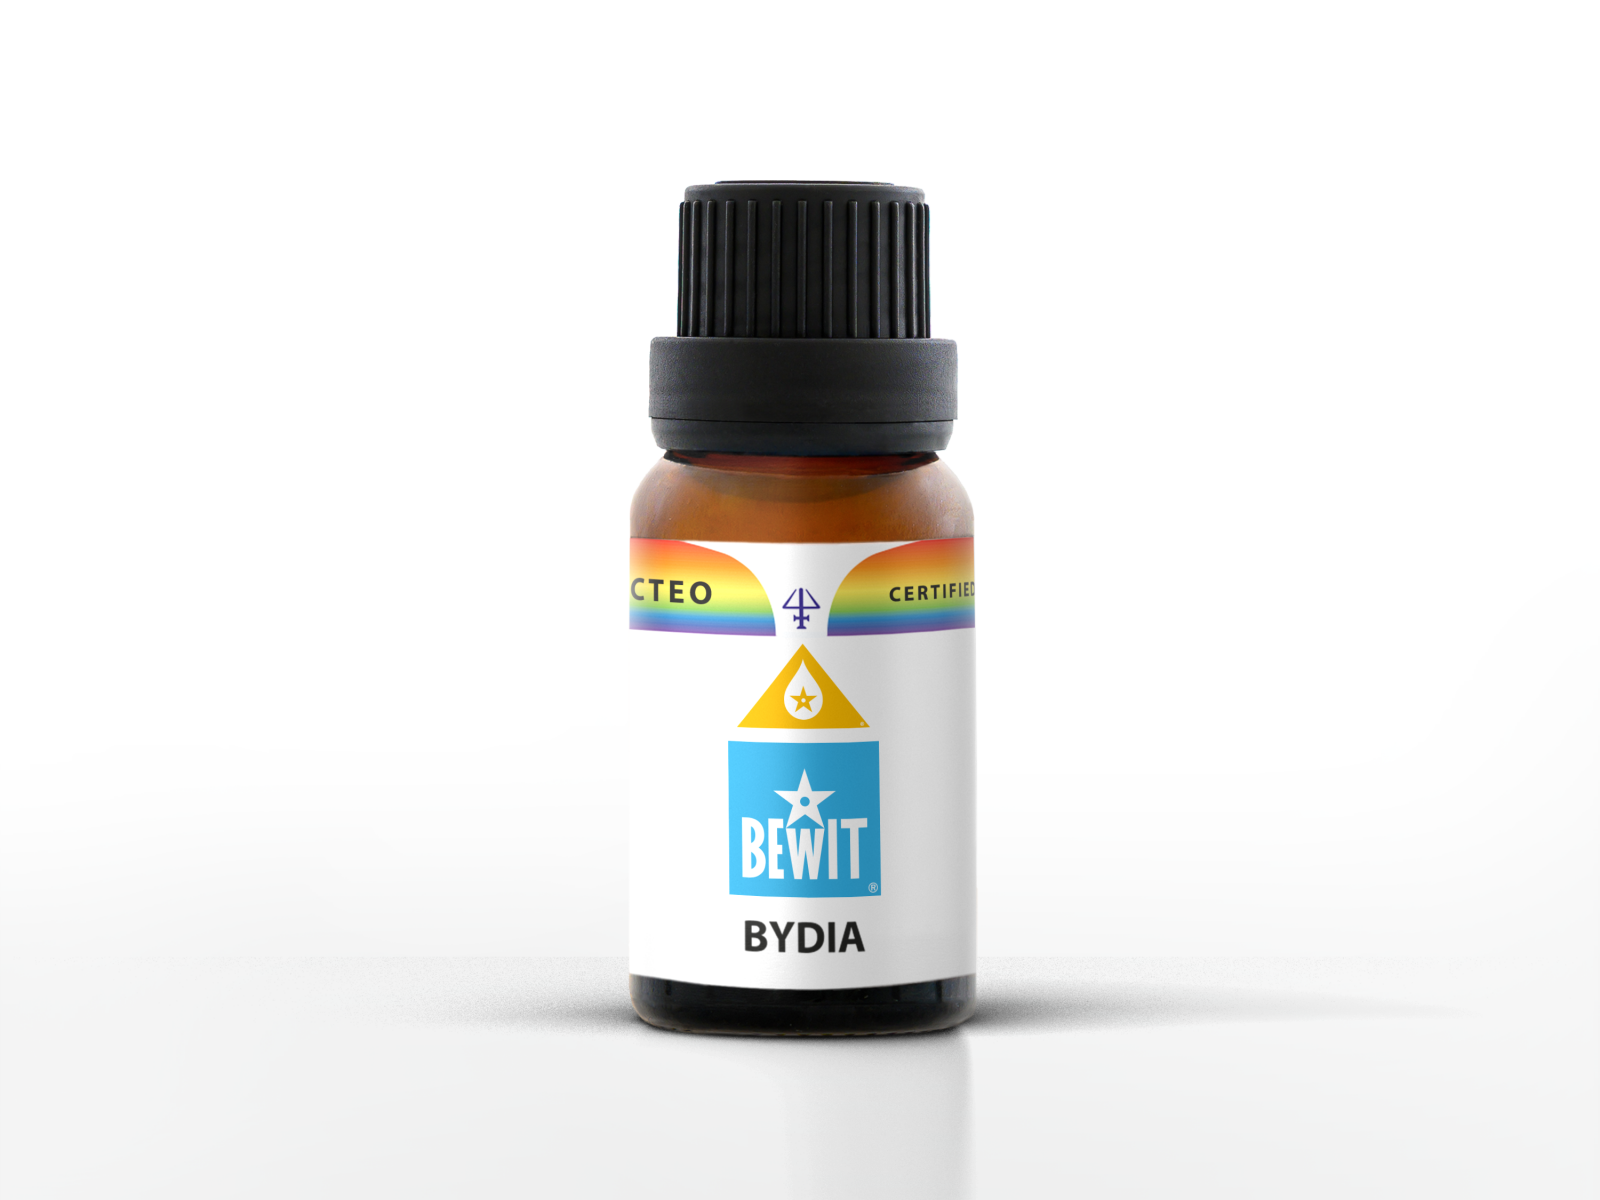 BEWIT BYDIA - Blend of essential oils - 1